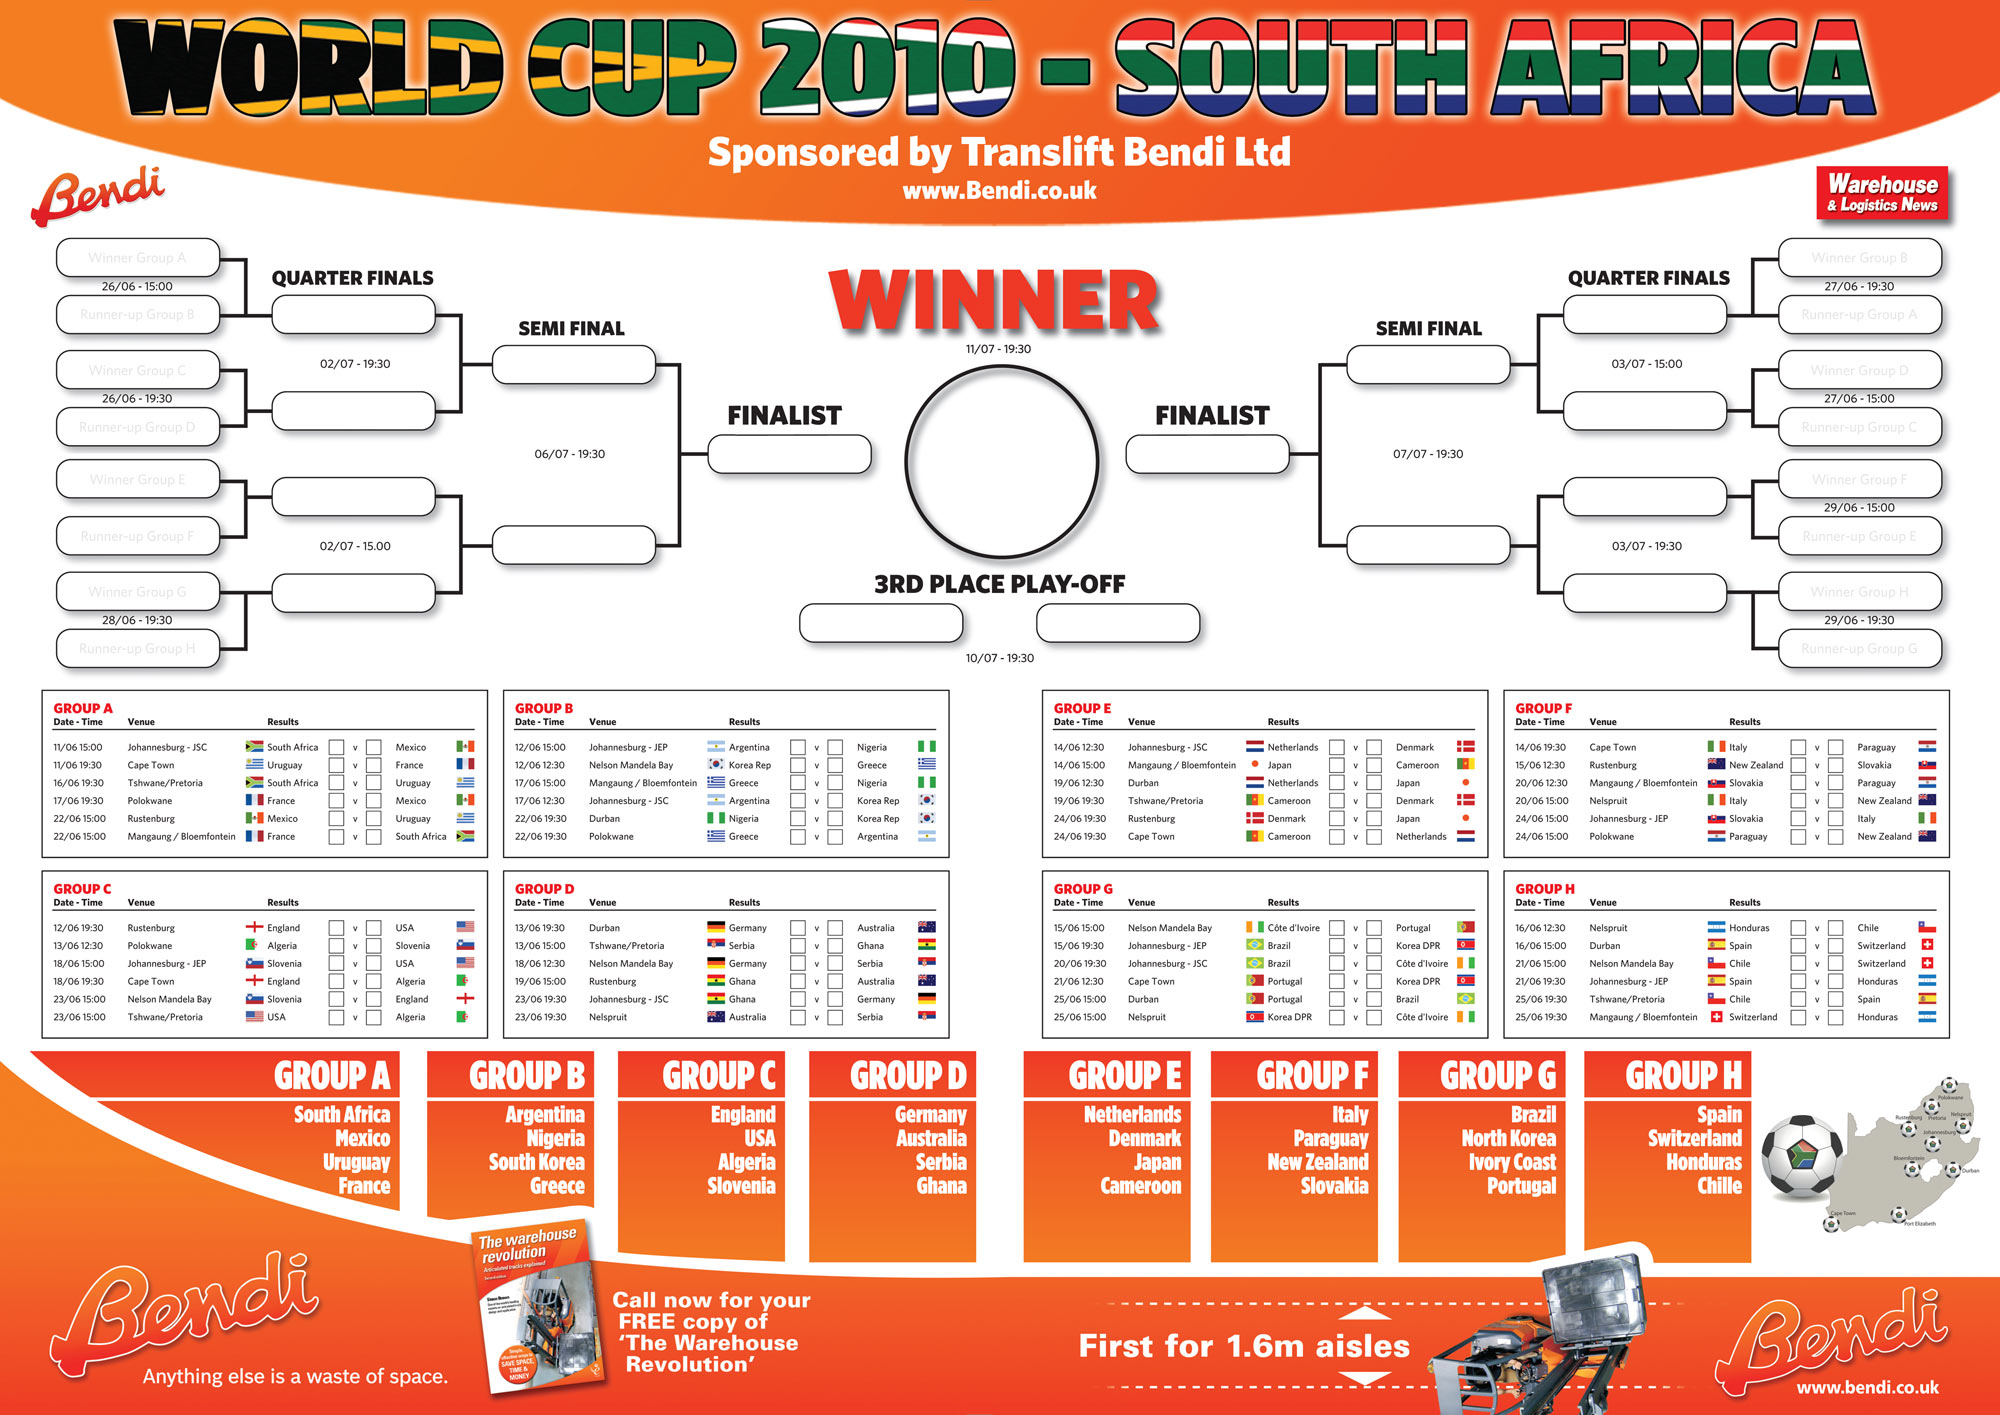 World Cup 2018 Wall Chart Free